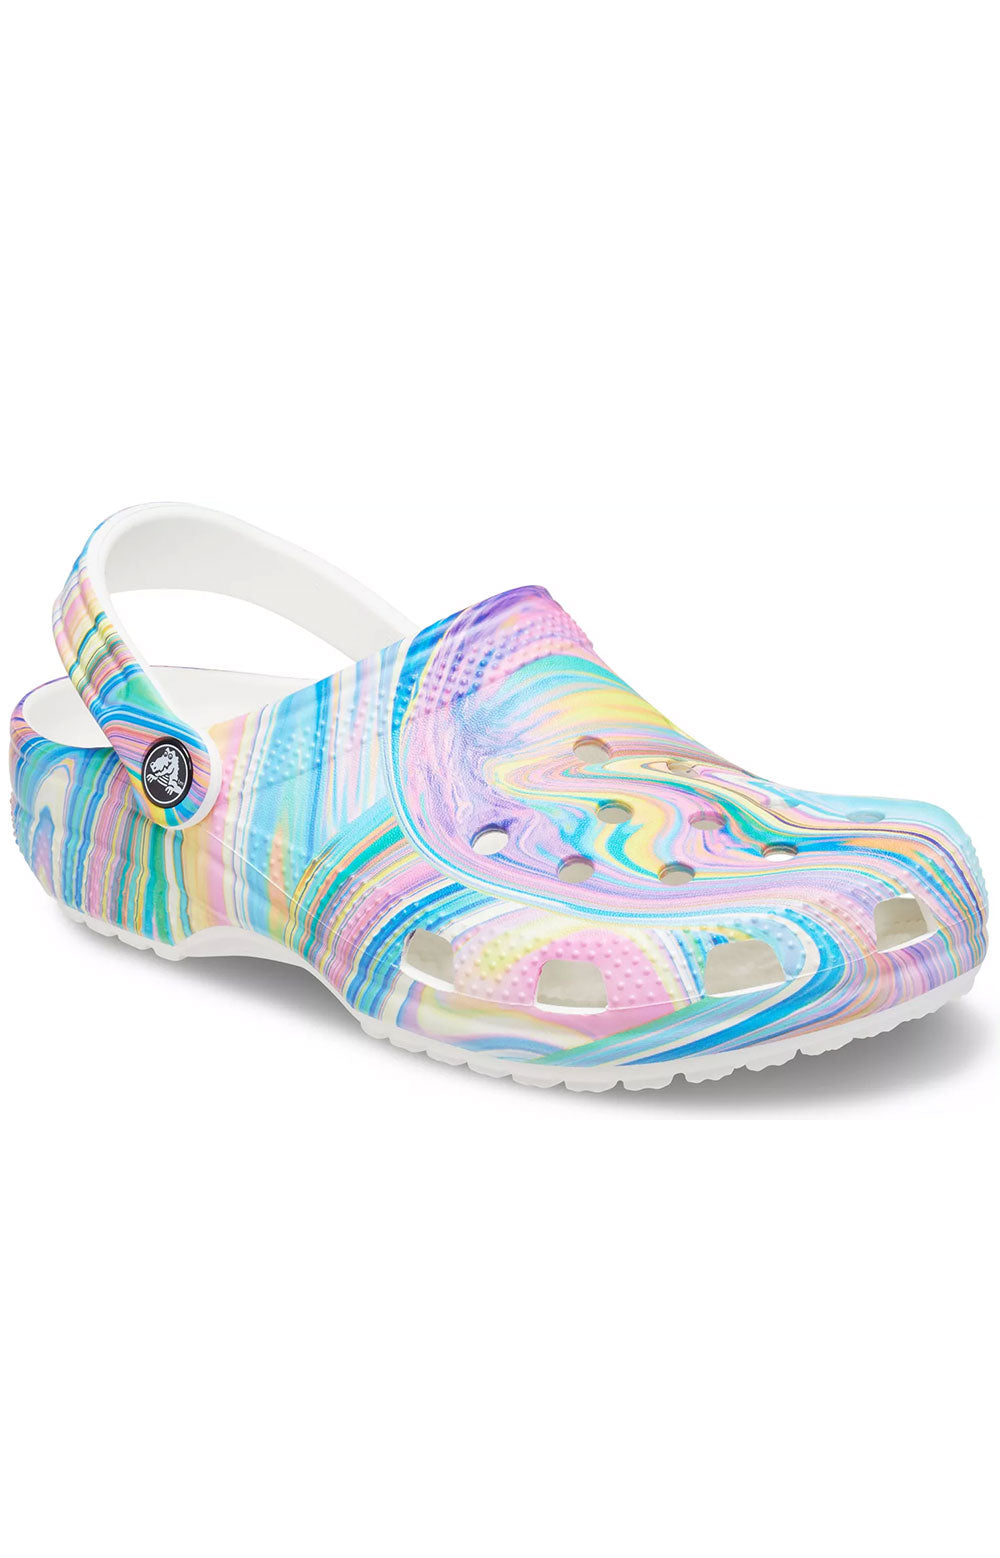 Classic Out of this World II Clogs - Multi/White